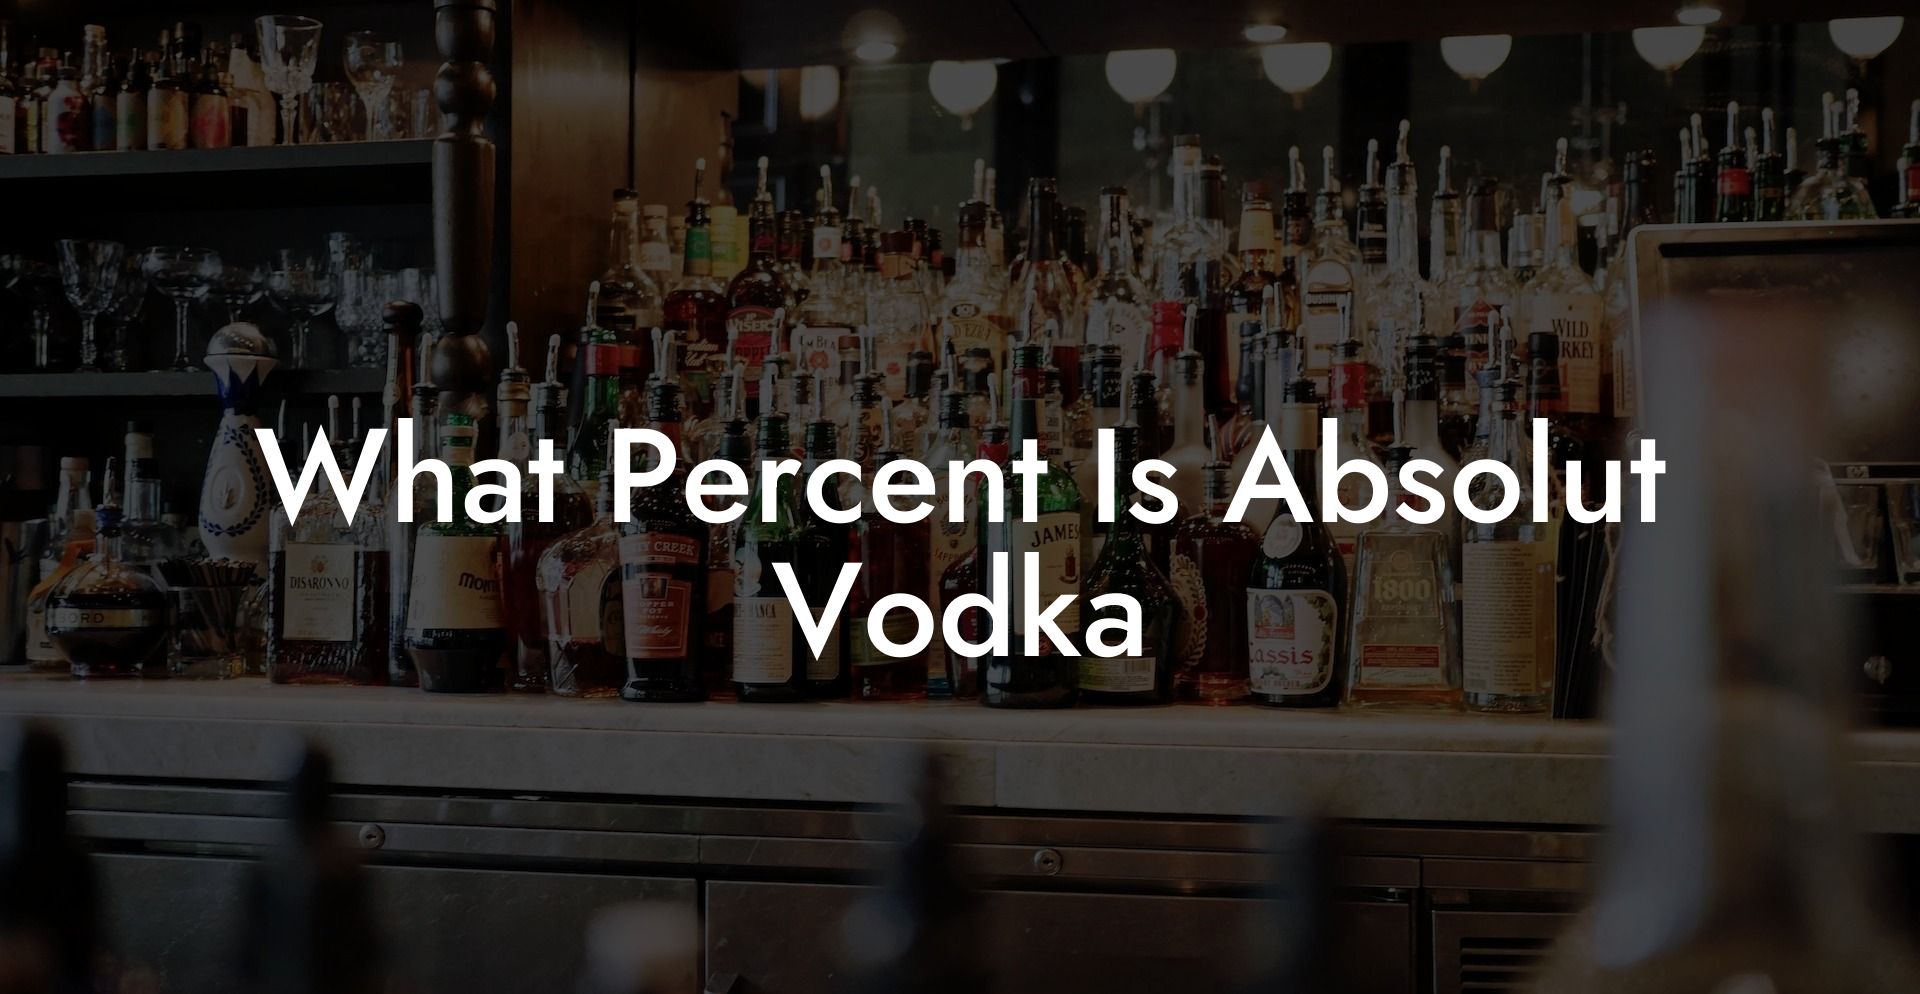 What Percent Is Absolut Vodka